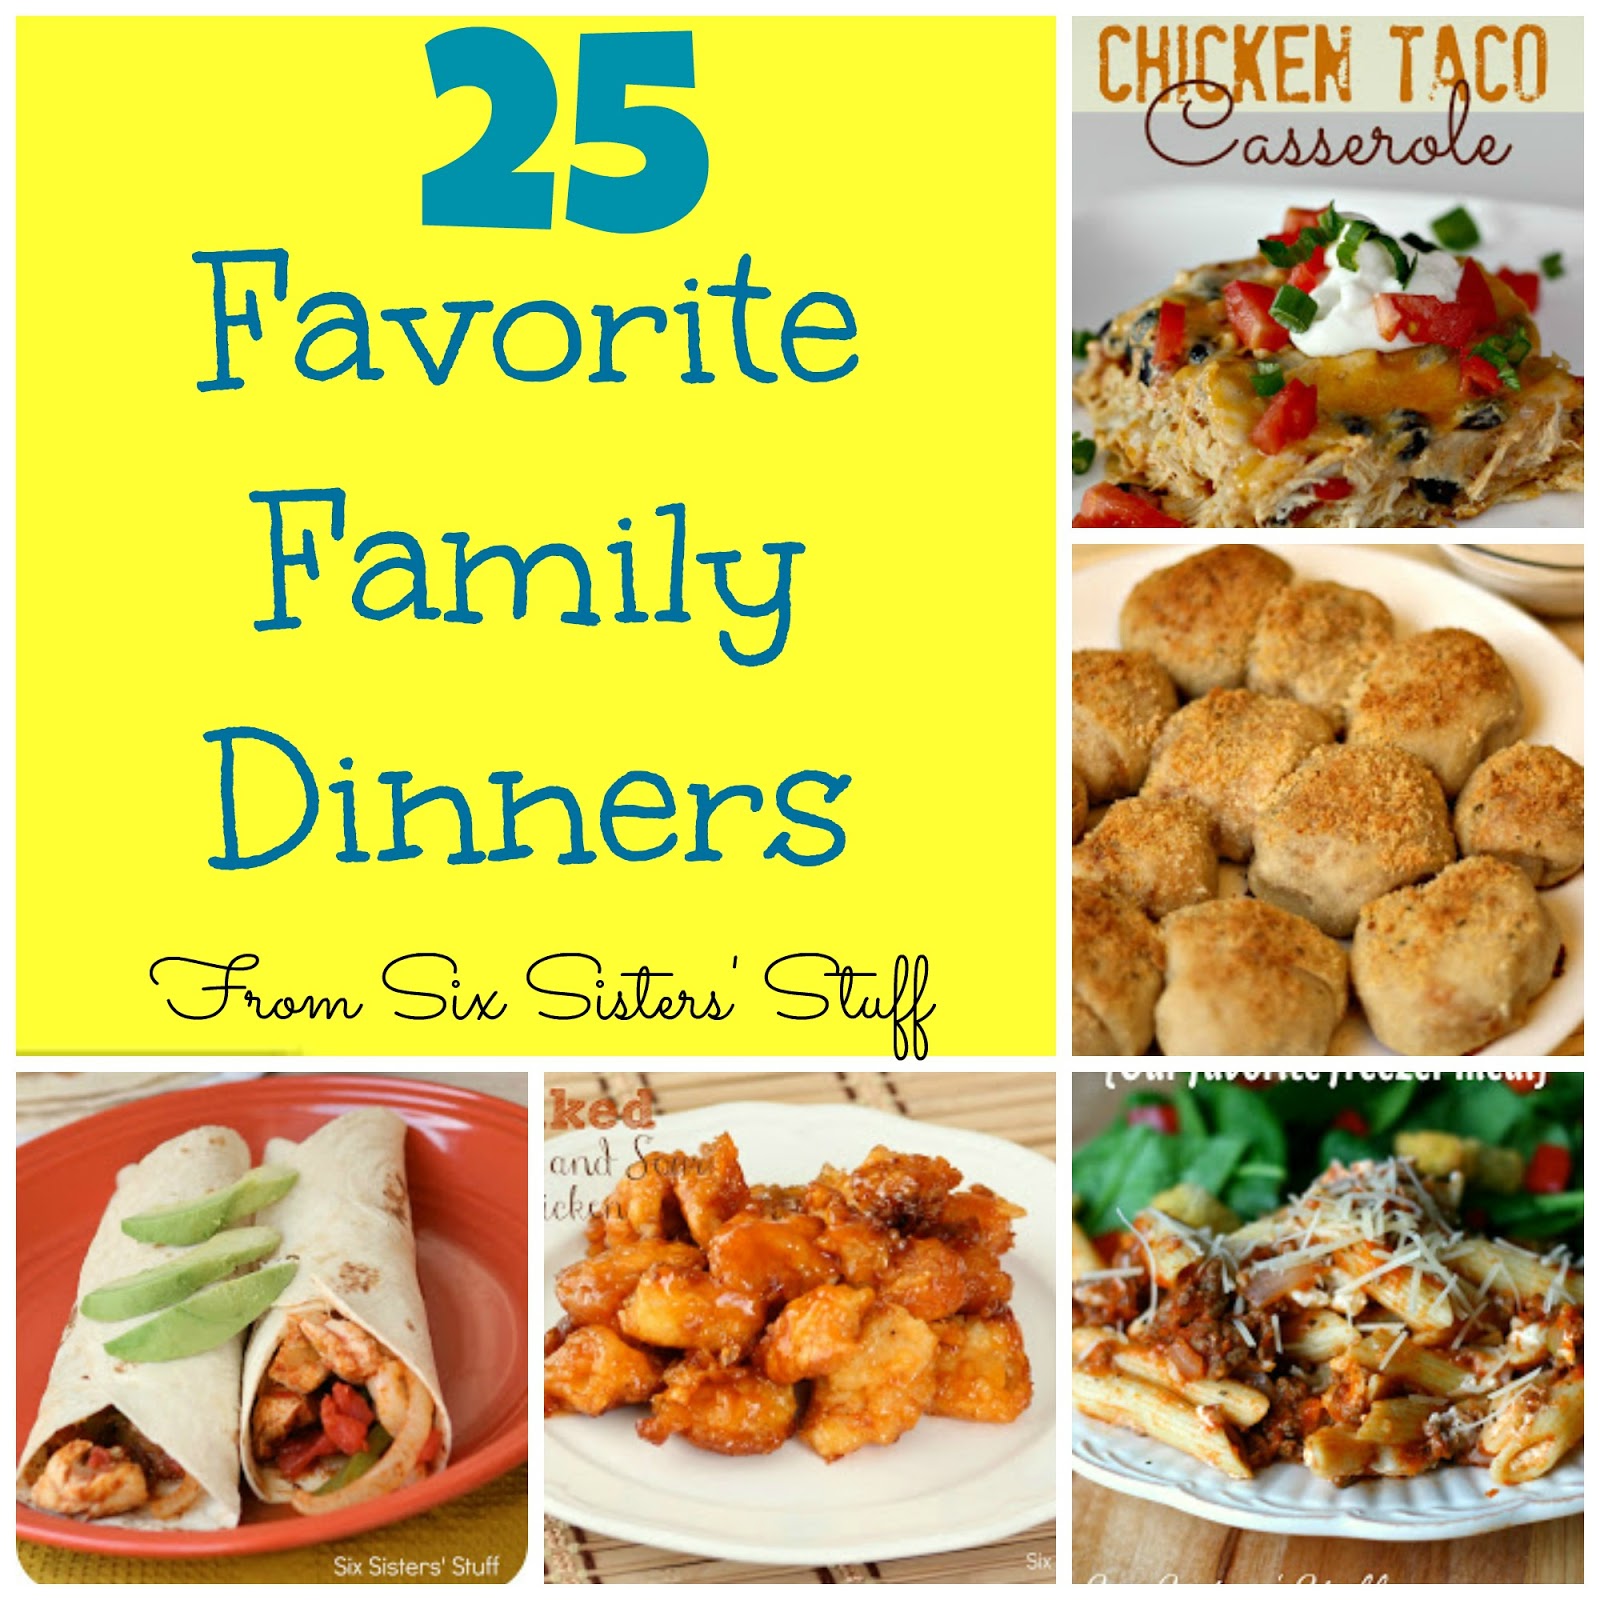 25 Favorite Family Dinners from Six Sisters' Stuff | Six Sisters' Stuff